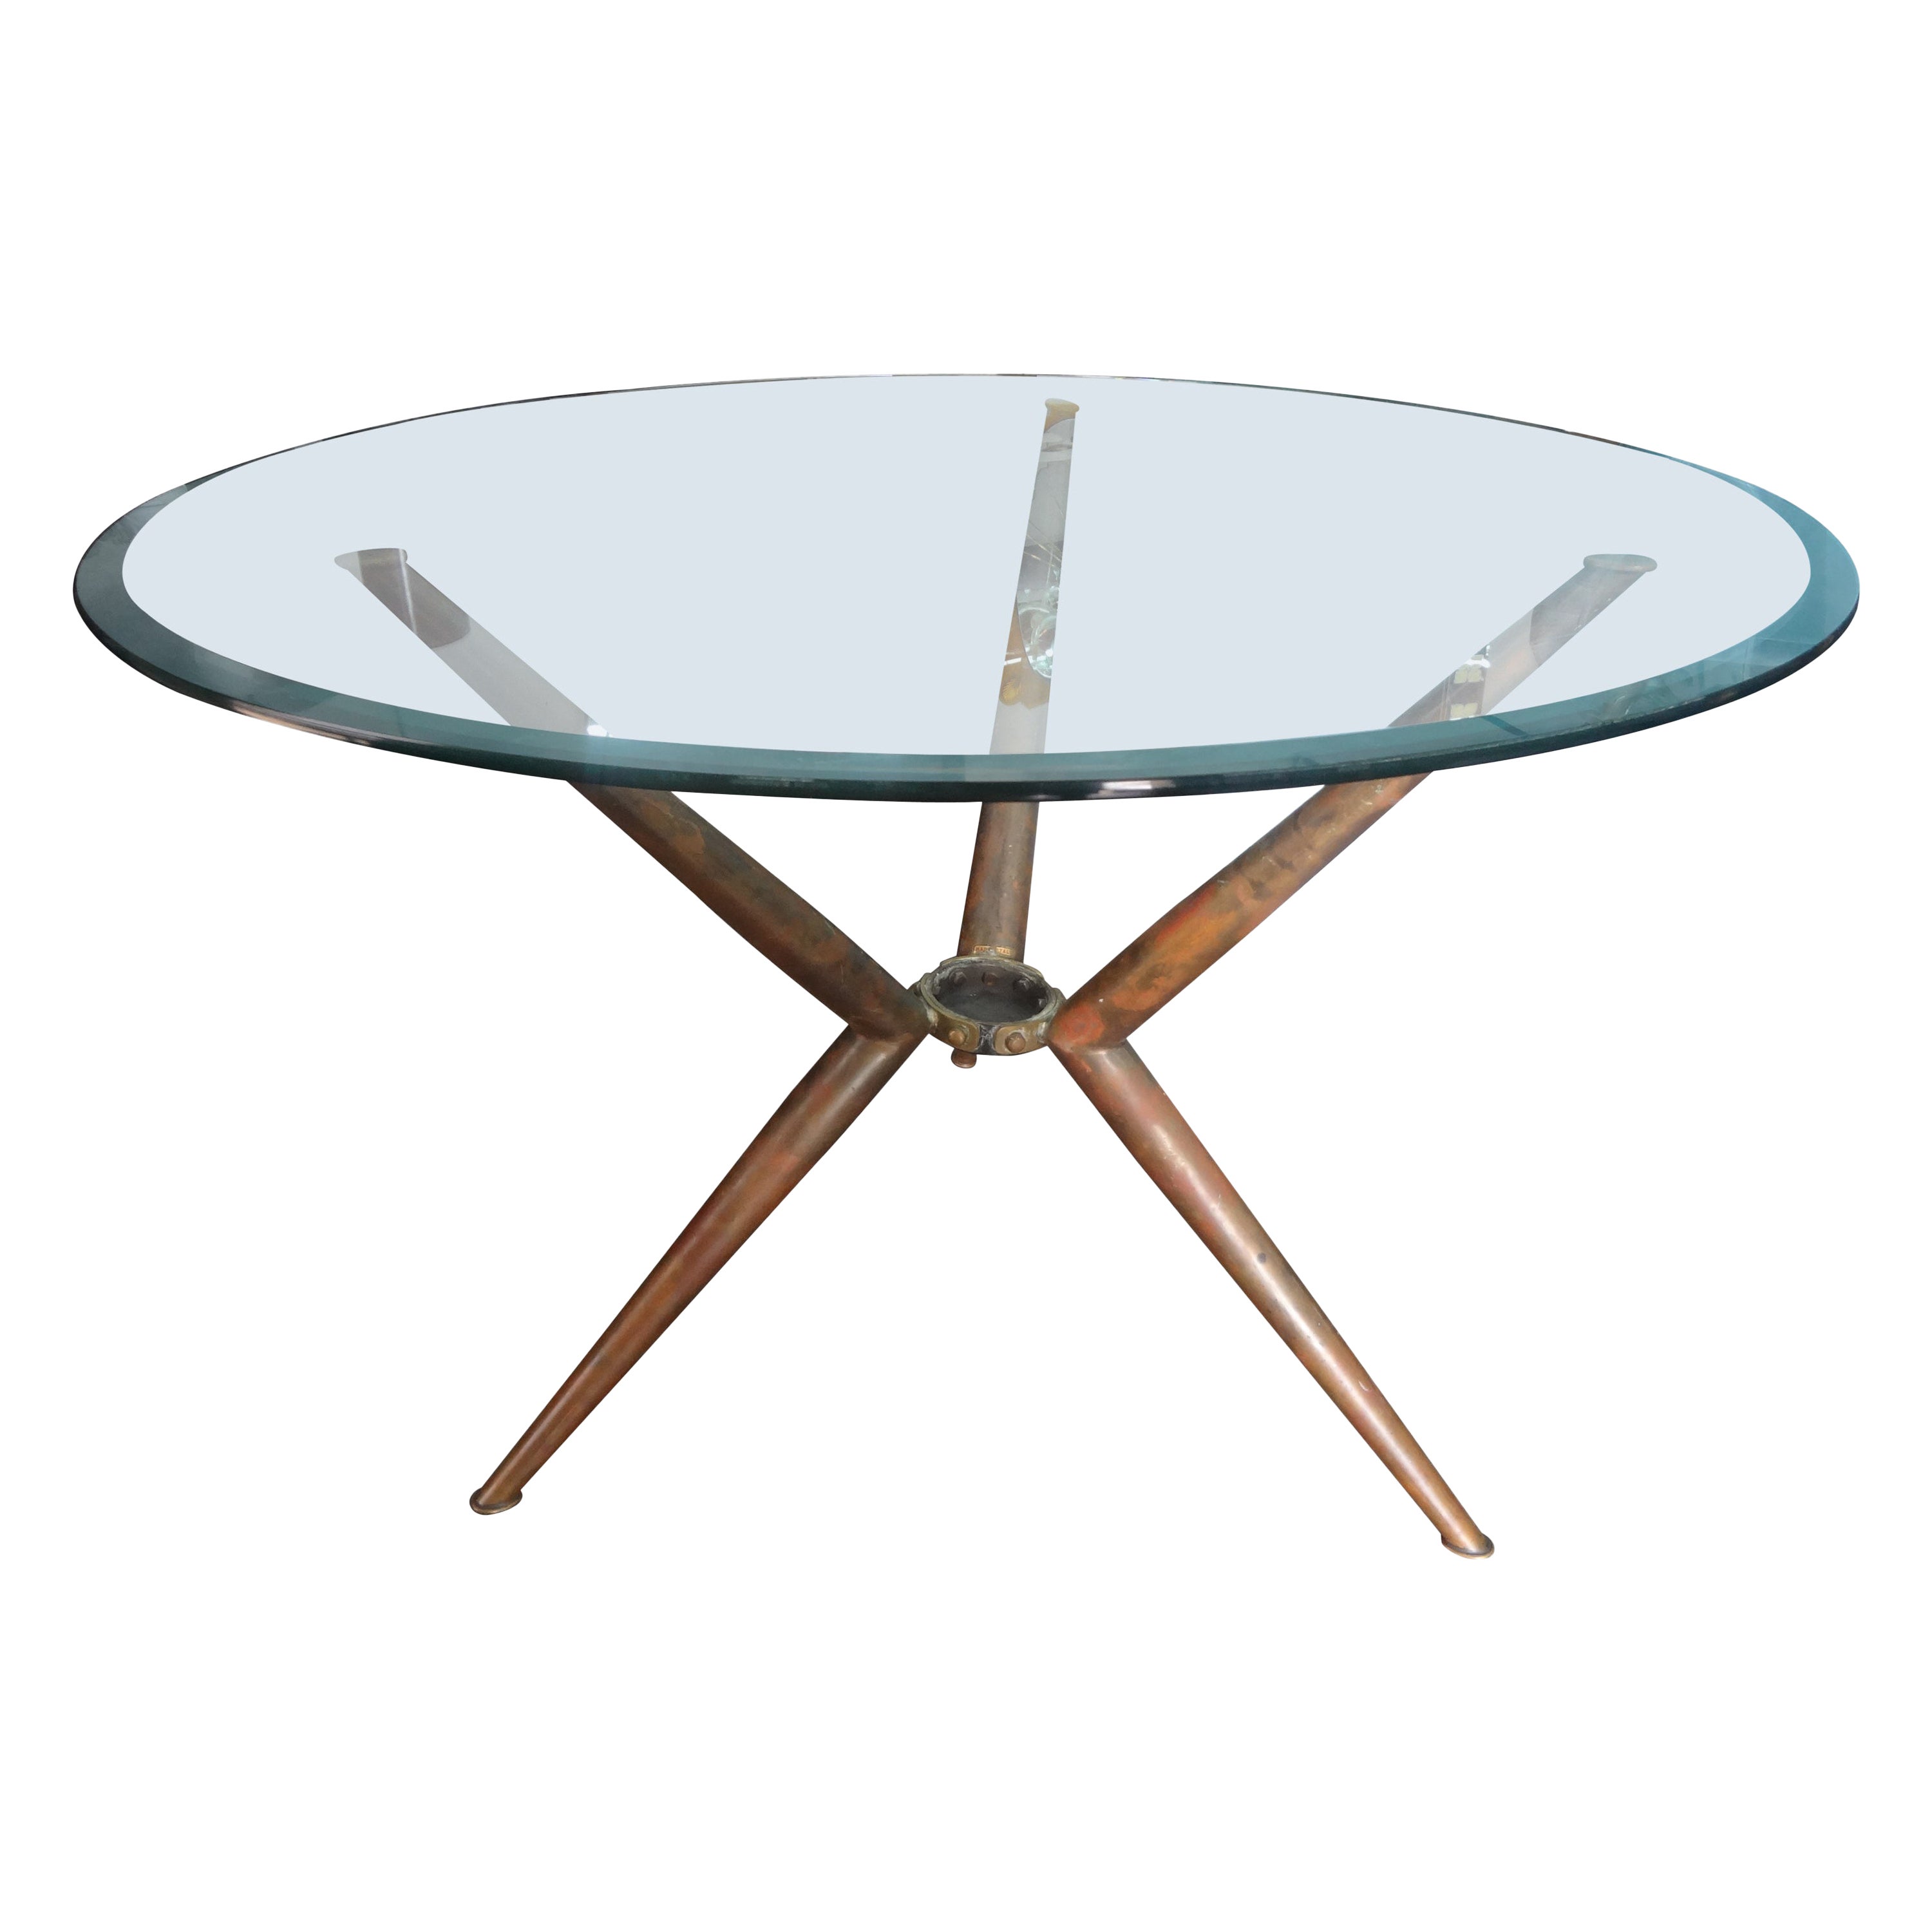 Italian Modern Brass Tripod Center Table With Glass Top For Sale